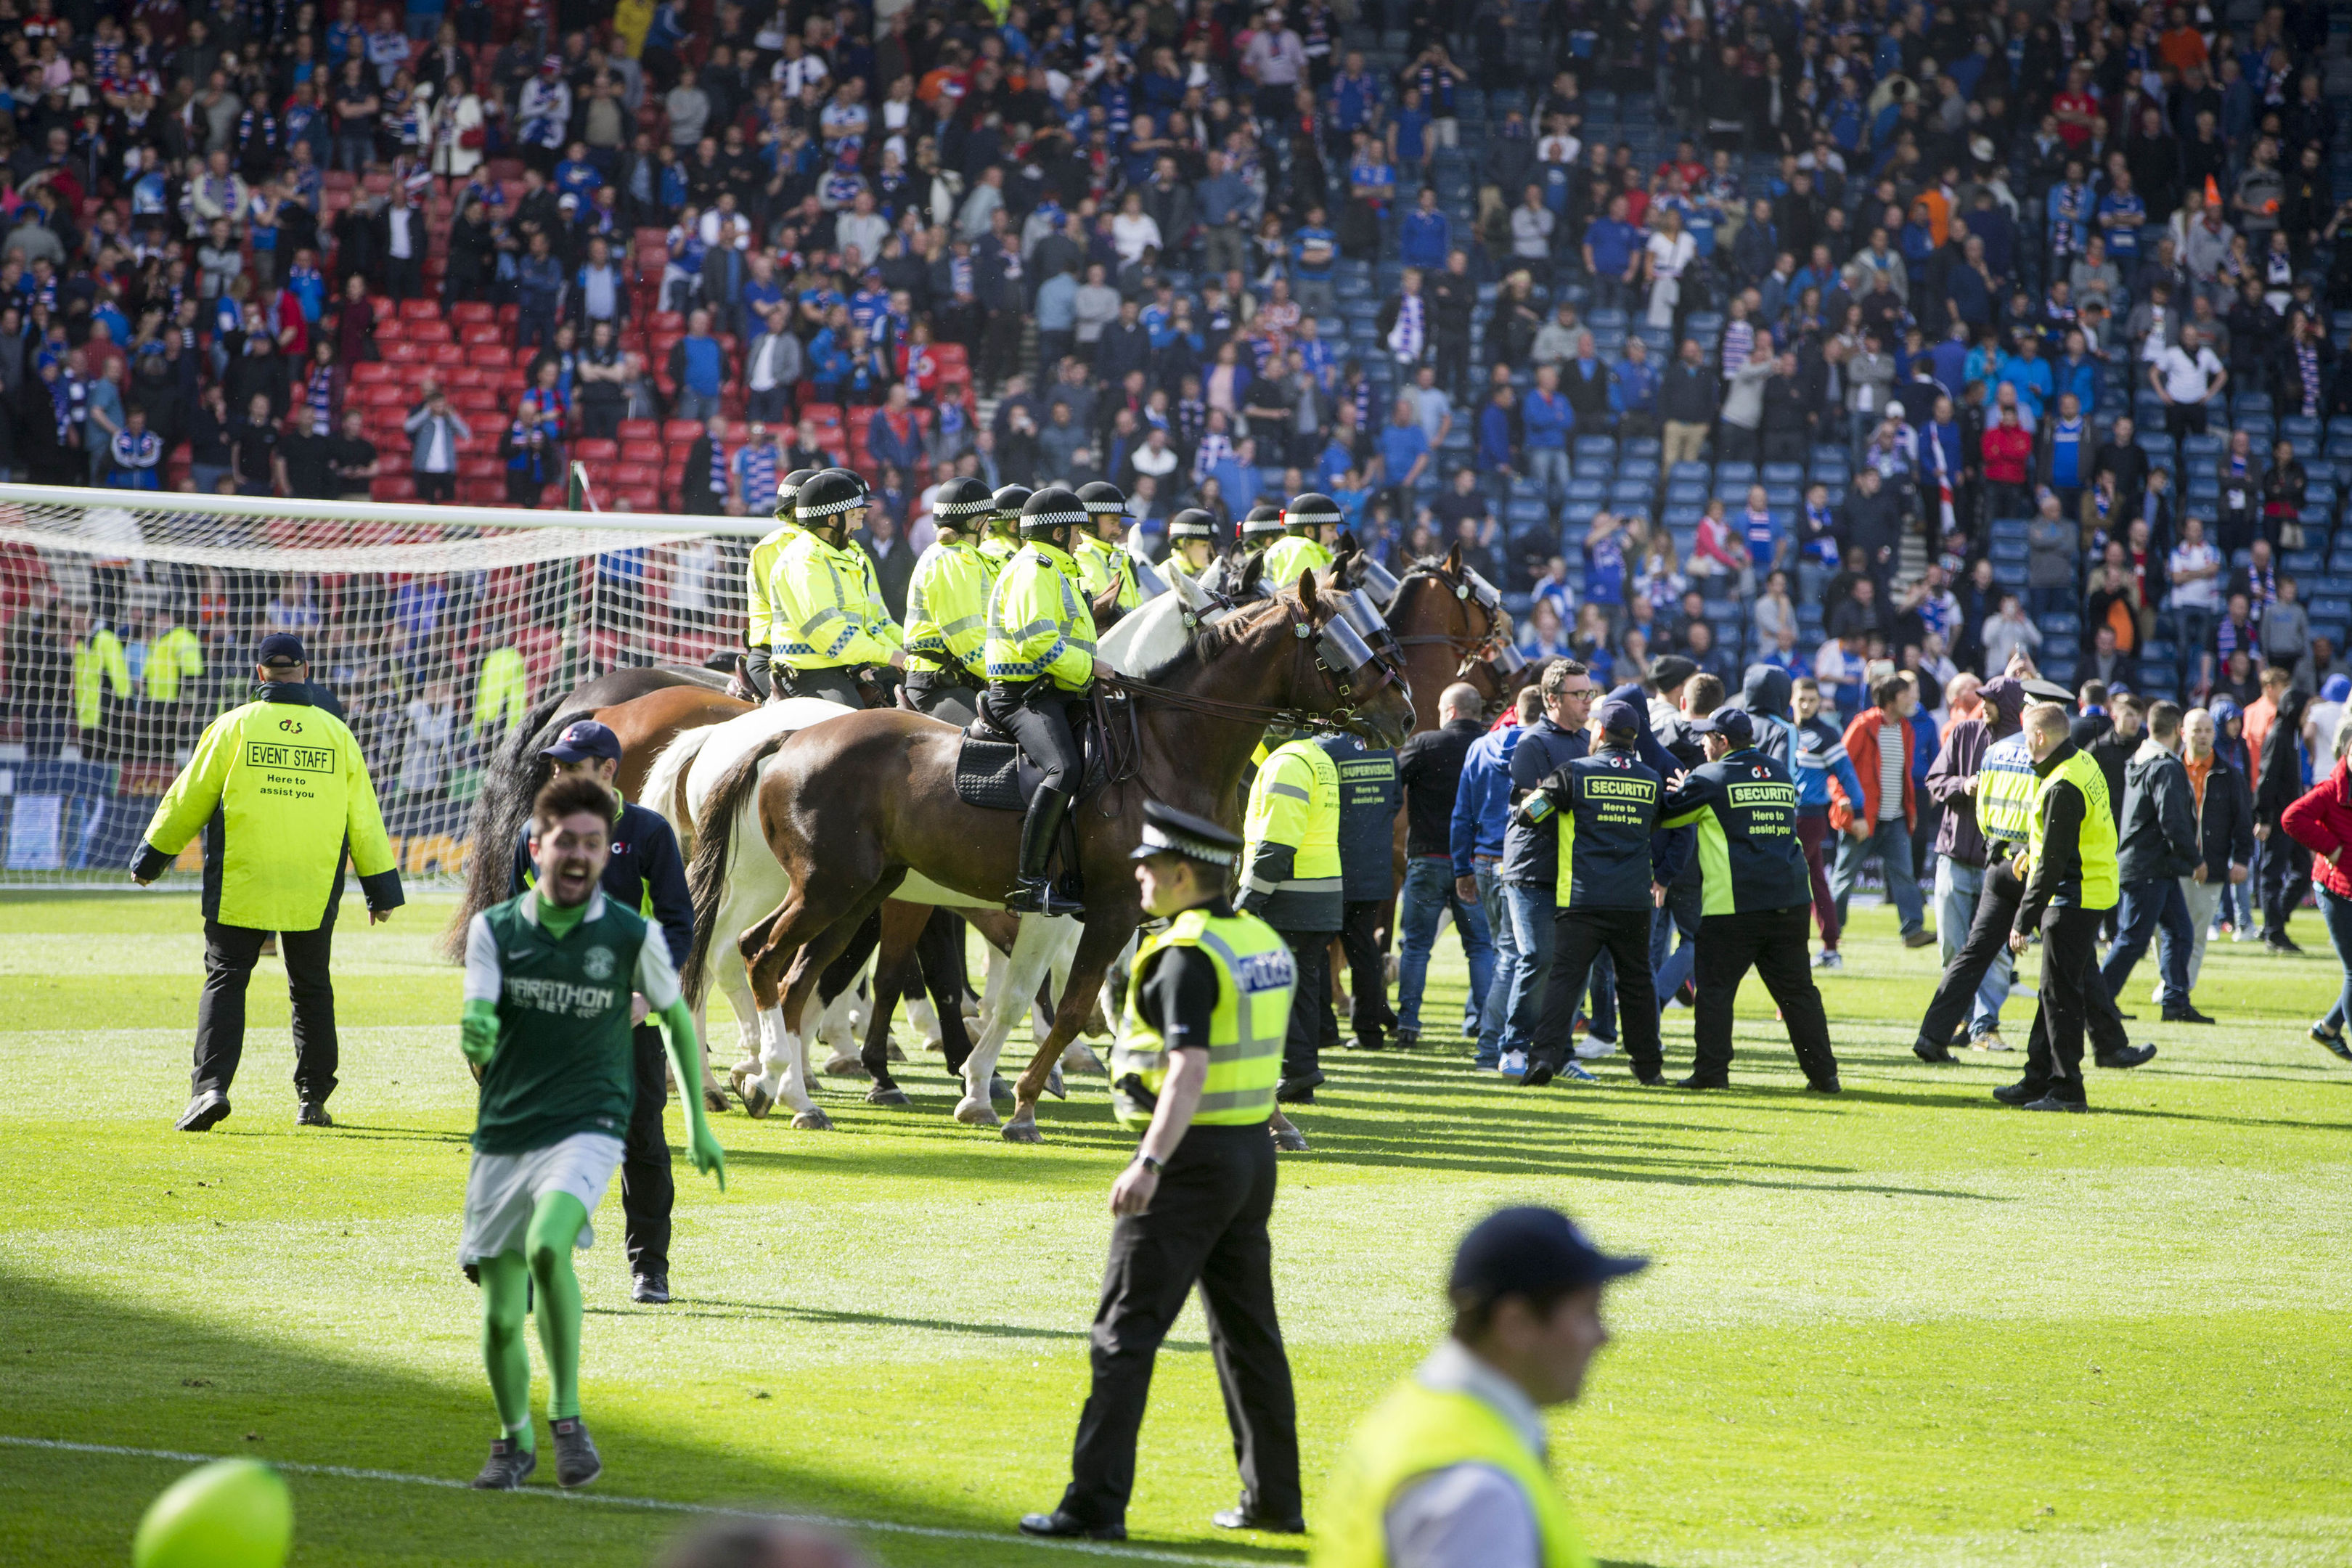 Police horses trying to guide fans off the pitch.